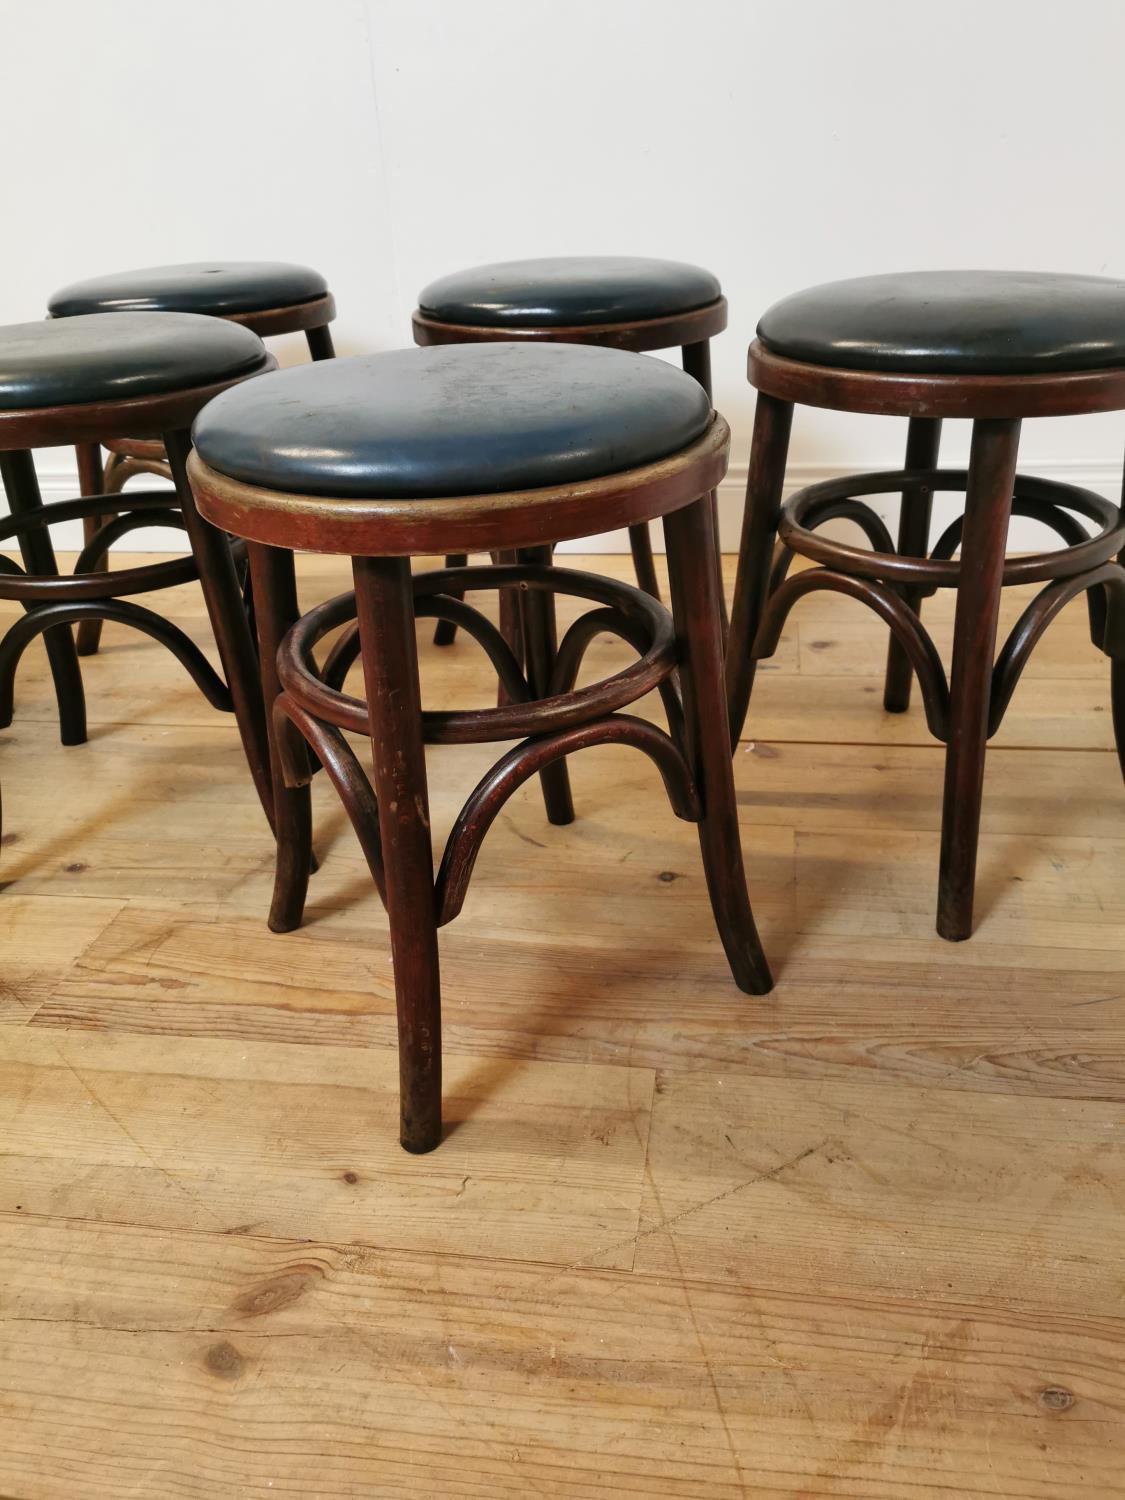 Set of six bentwood stools with leather upholstered seats. {49 cm H x 33 cm W x 33 cm D}. - Image 5 of 5